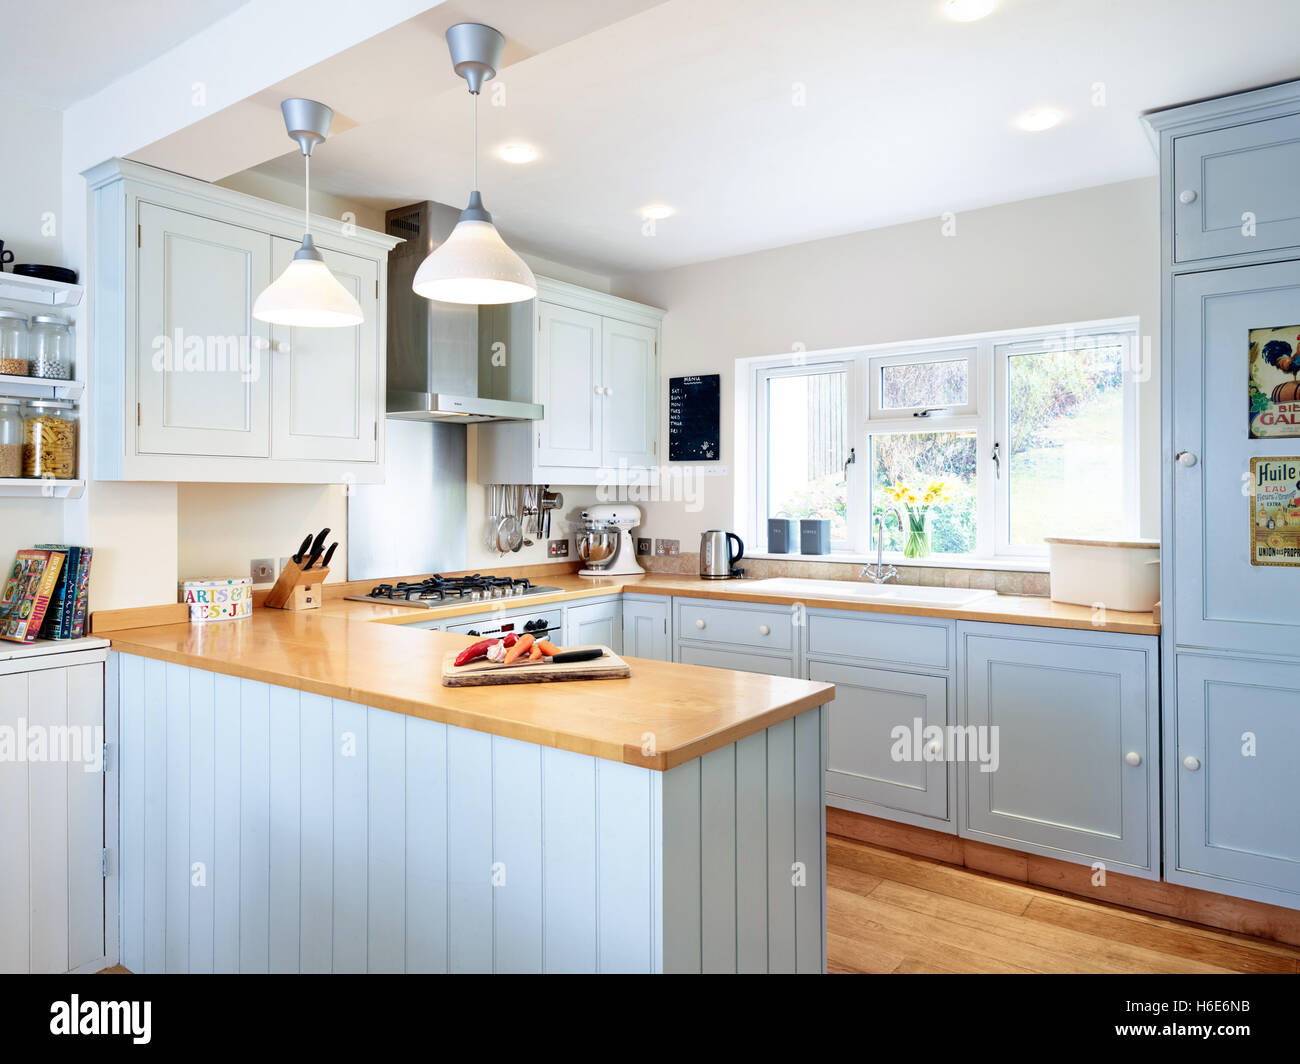 A contemporary, fresh kitchen incorporating an integrated oven, cooker, hood & wood work surfaces. Gloucestershire, UK Stock Photo